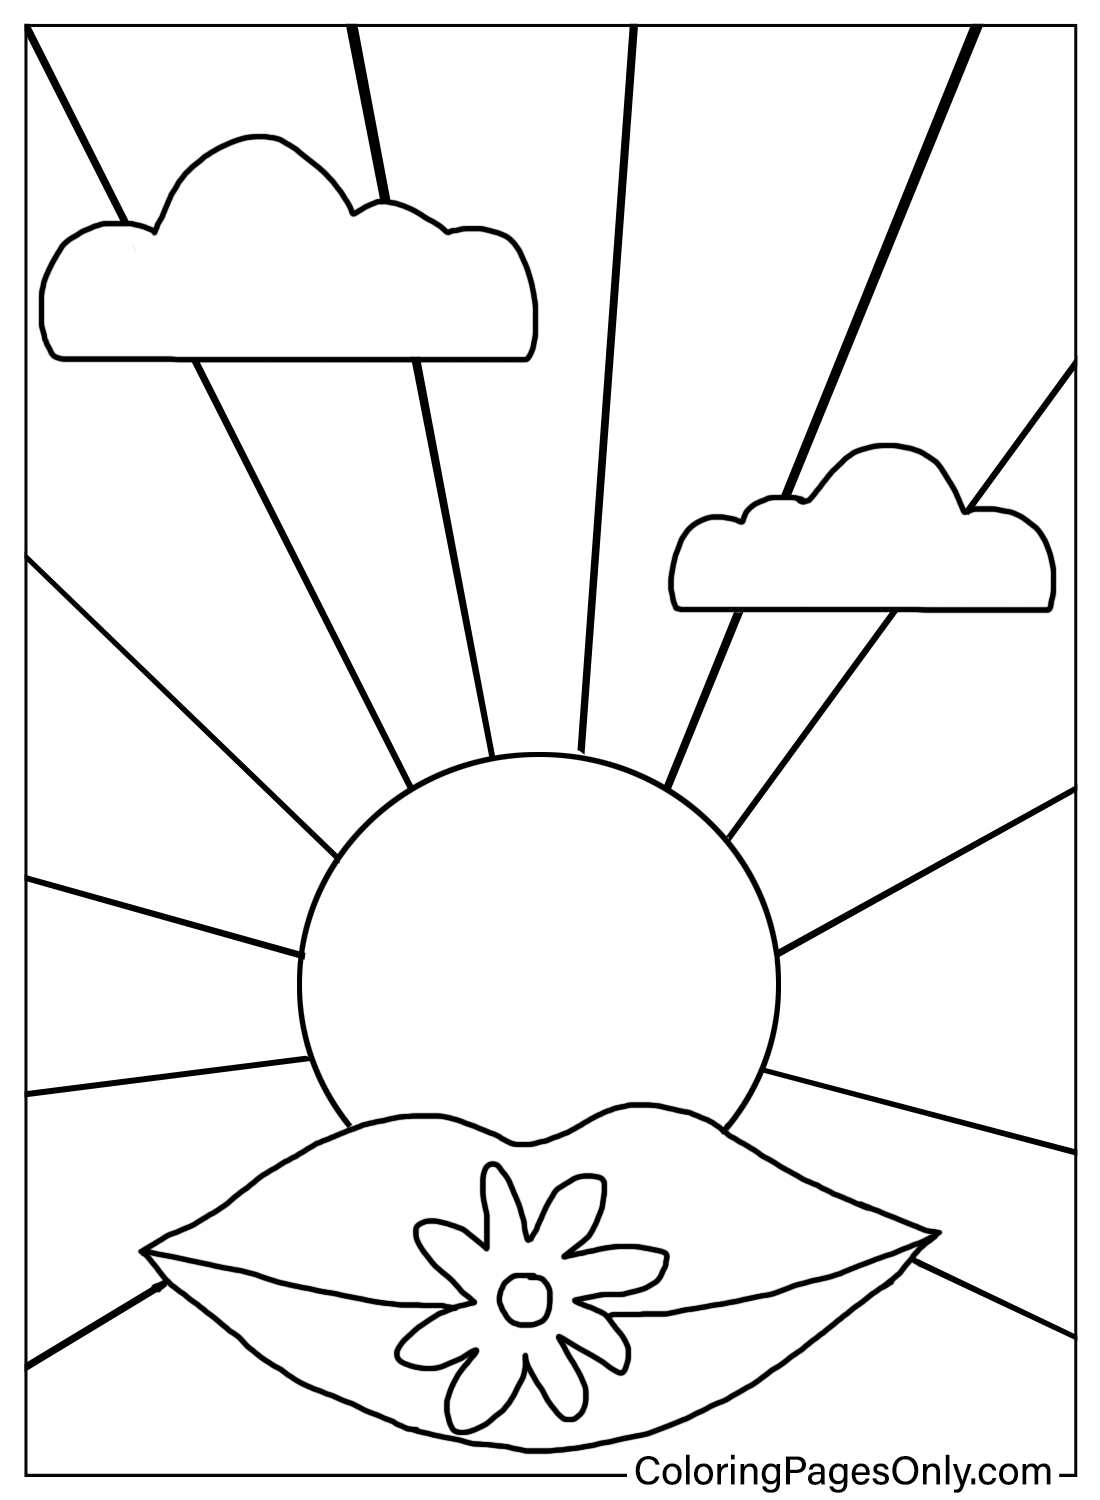 Coloring Page Hippie Sunshine and Lips from Hippie